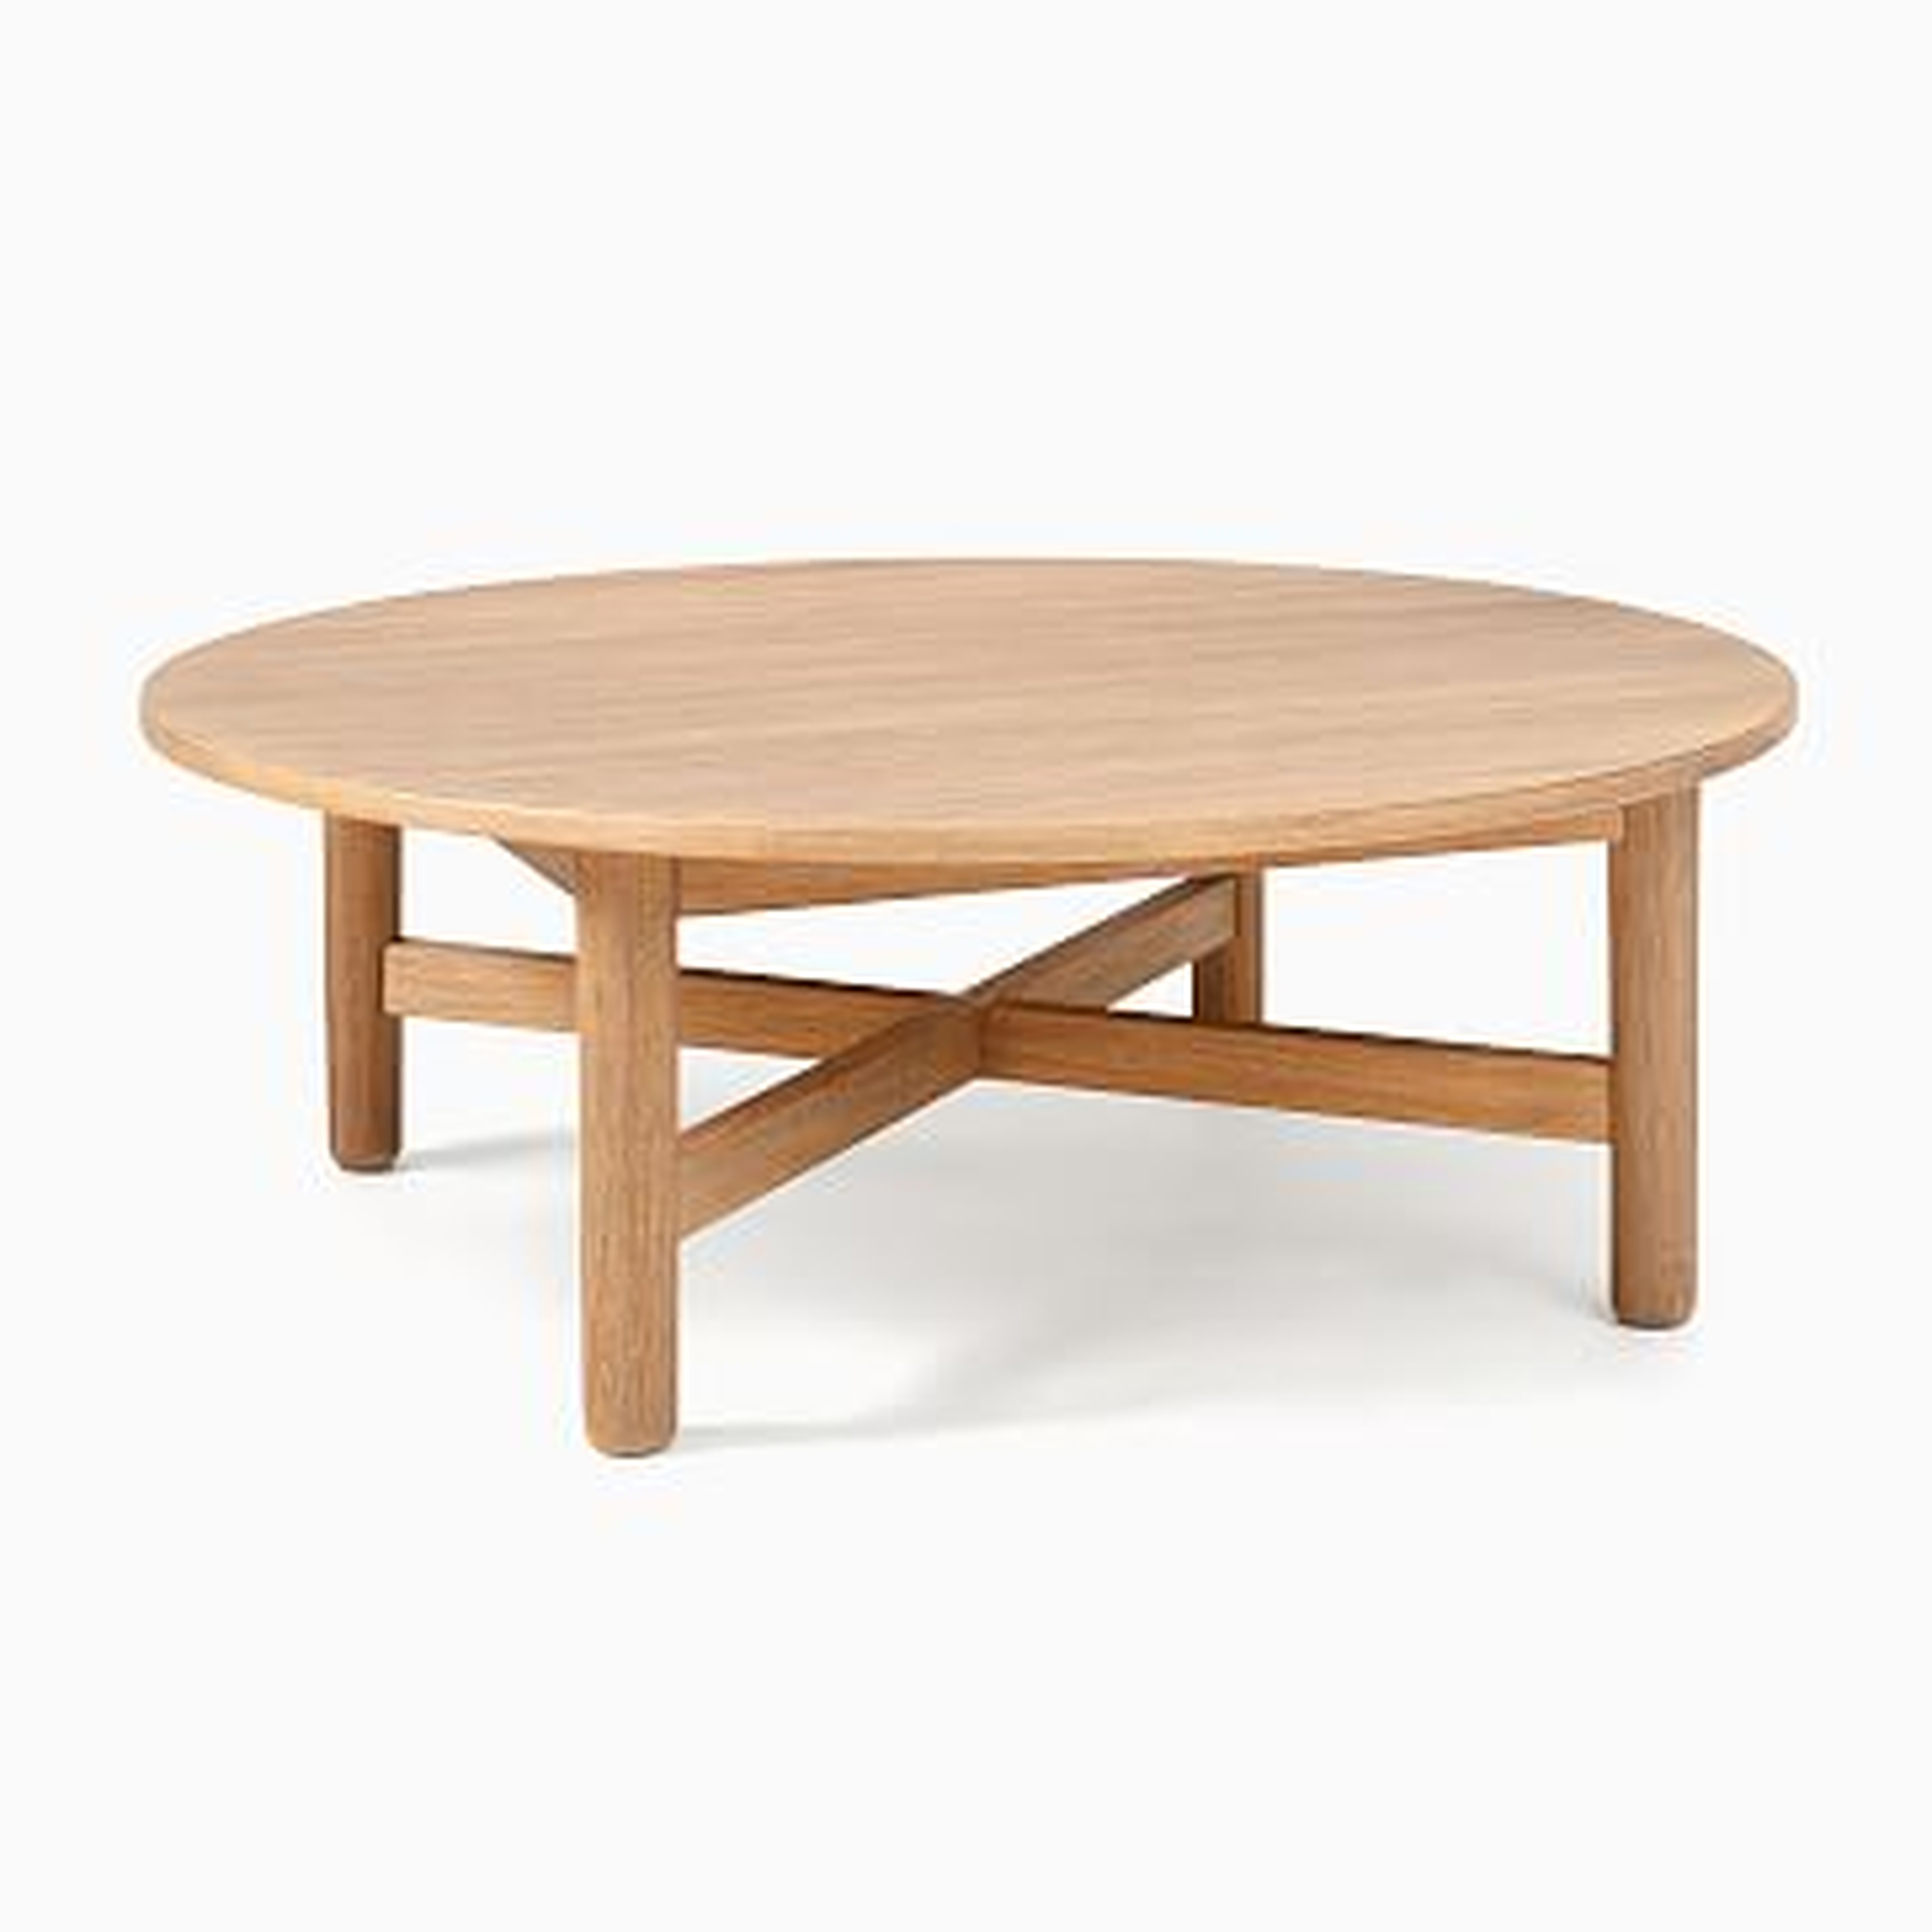 Hargrove Dune 50 Inch Round Coffee Table - West Elm